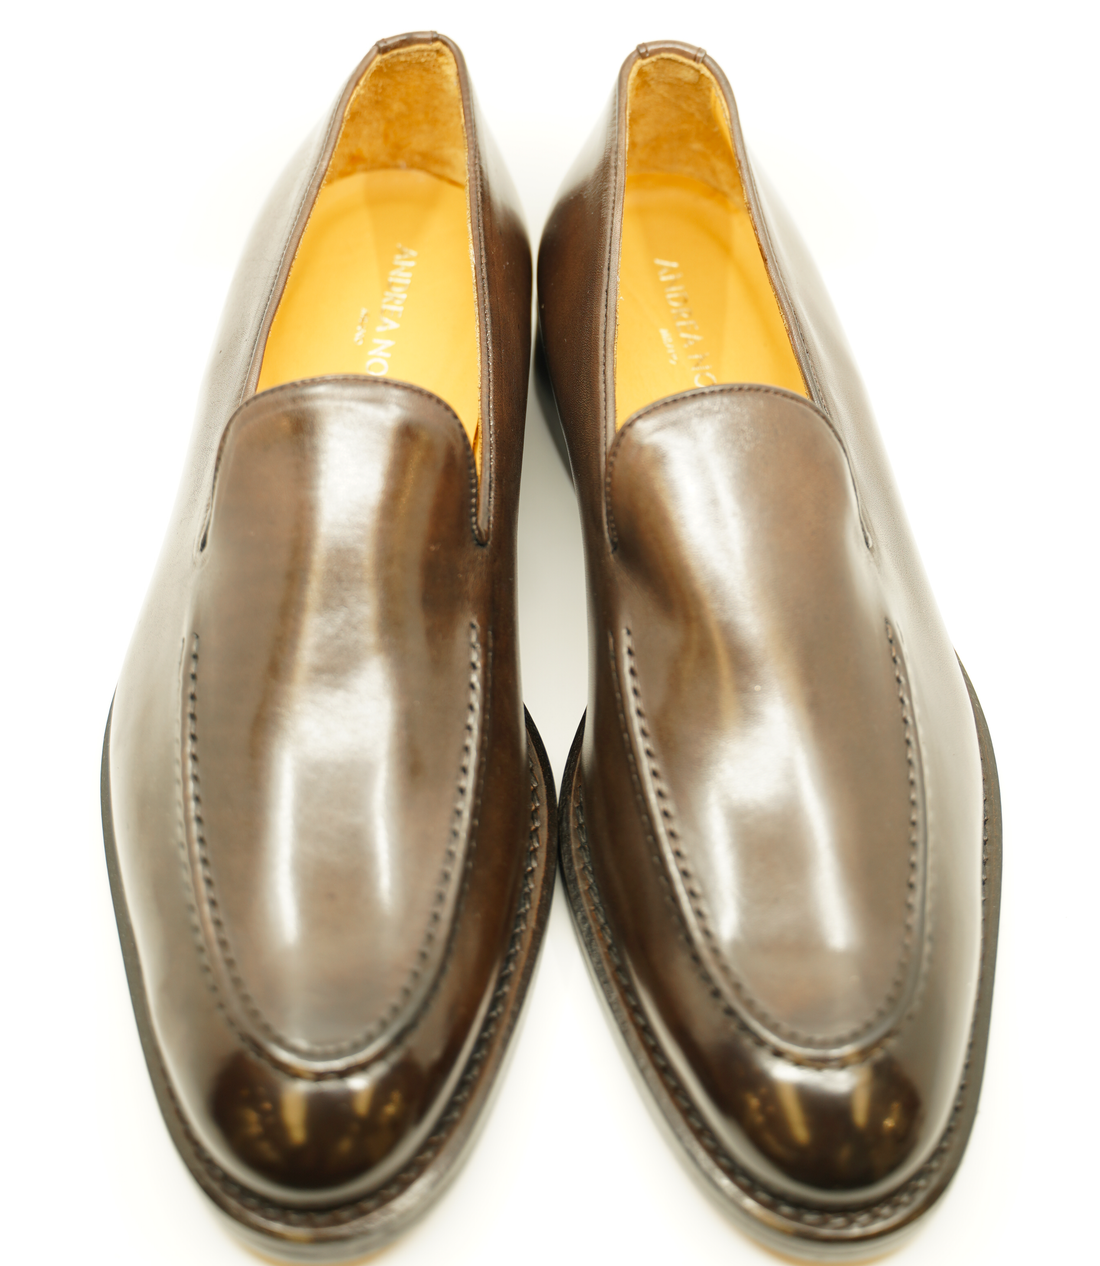 Andrea Nobile - Coffee Brown leather dress loafer with burgundy sole